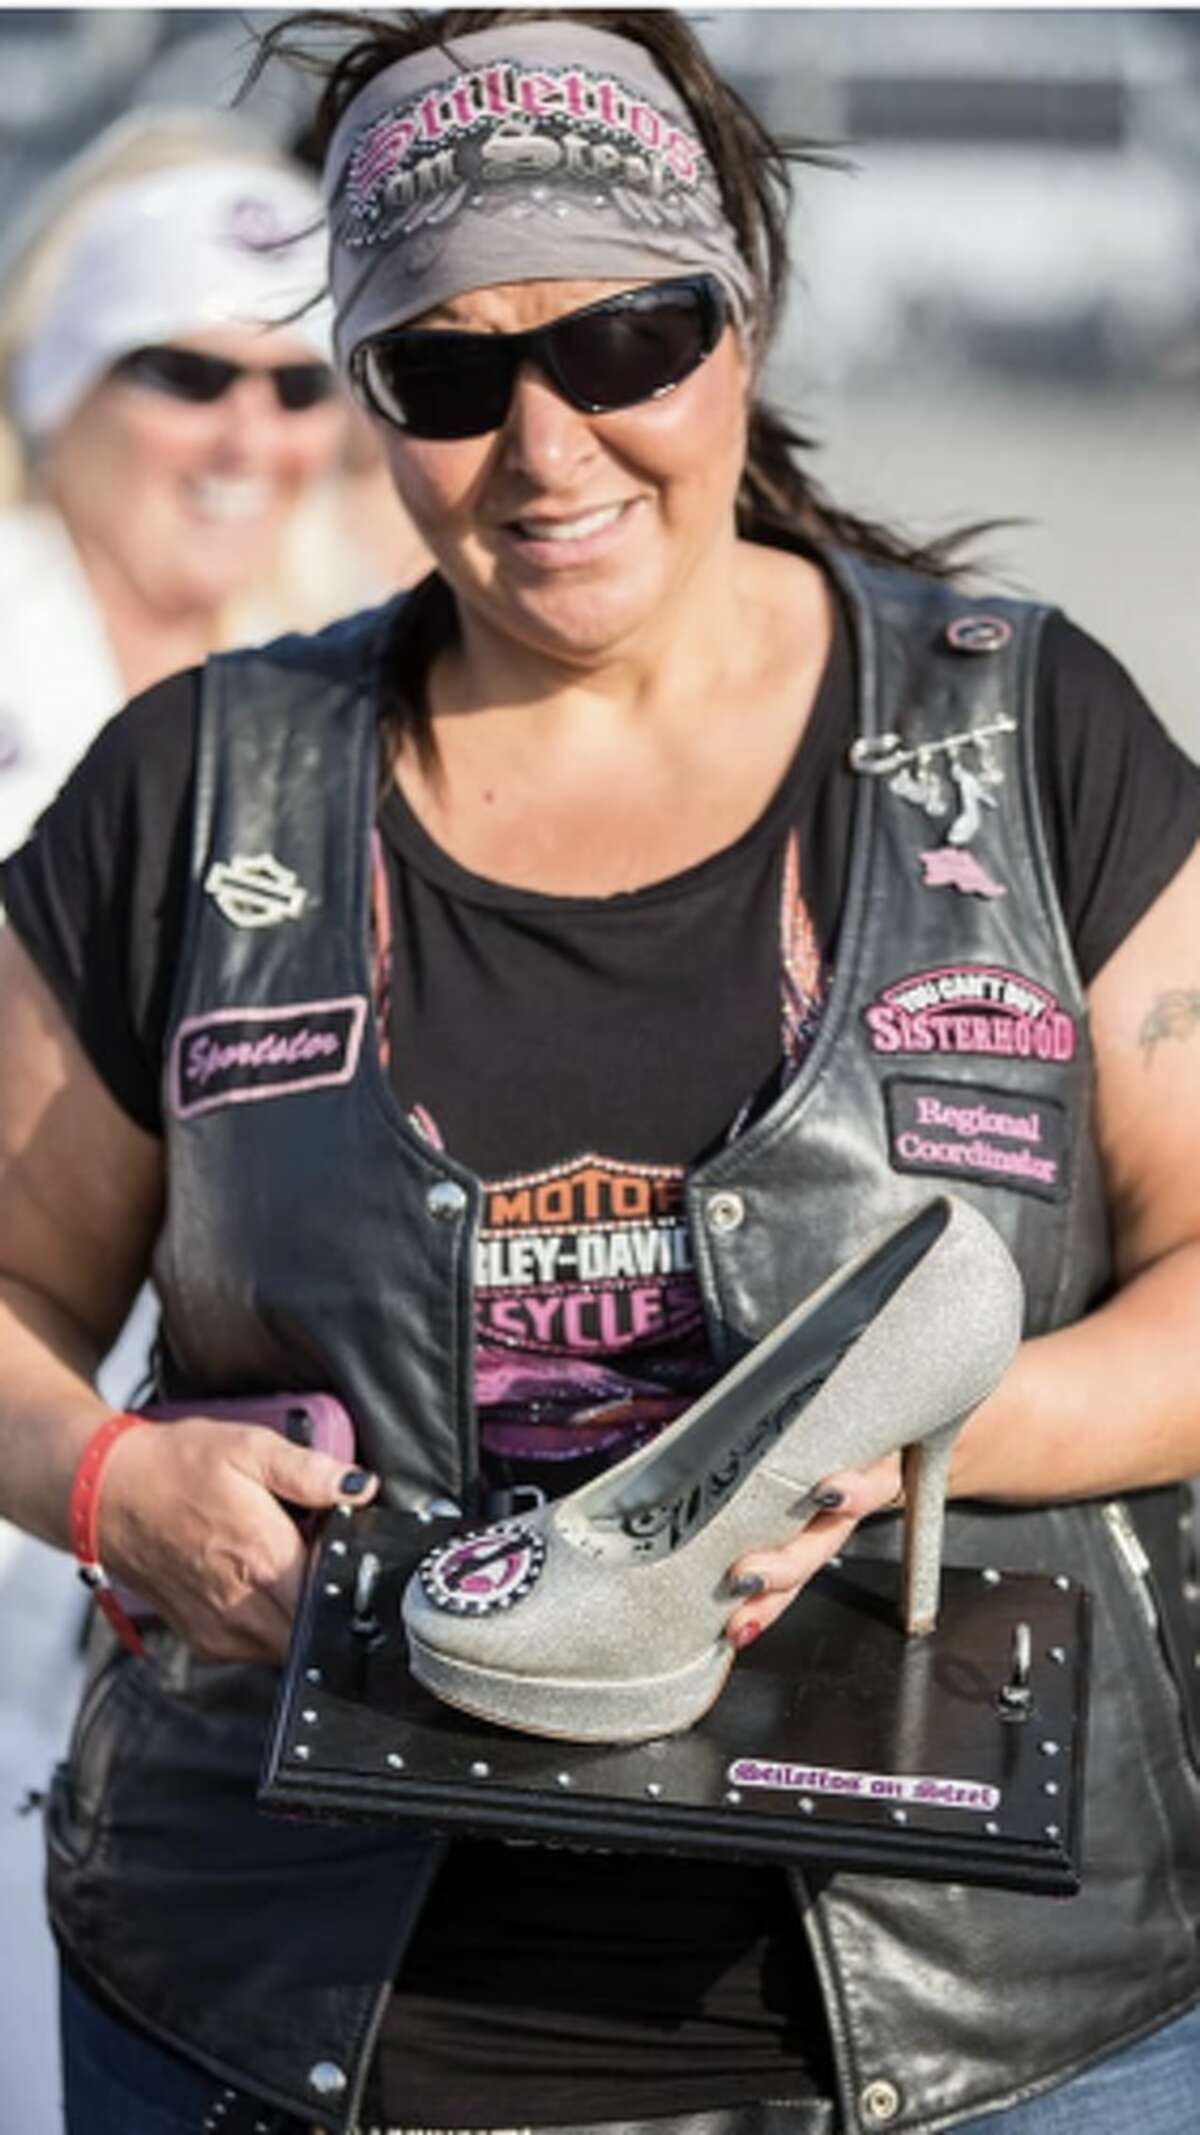 Tina LaHaye pictured at the Miracle Ride for Riley's Children's Hospital event in Indiana. (Courtesy Photo/Tina LaHaye)